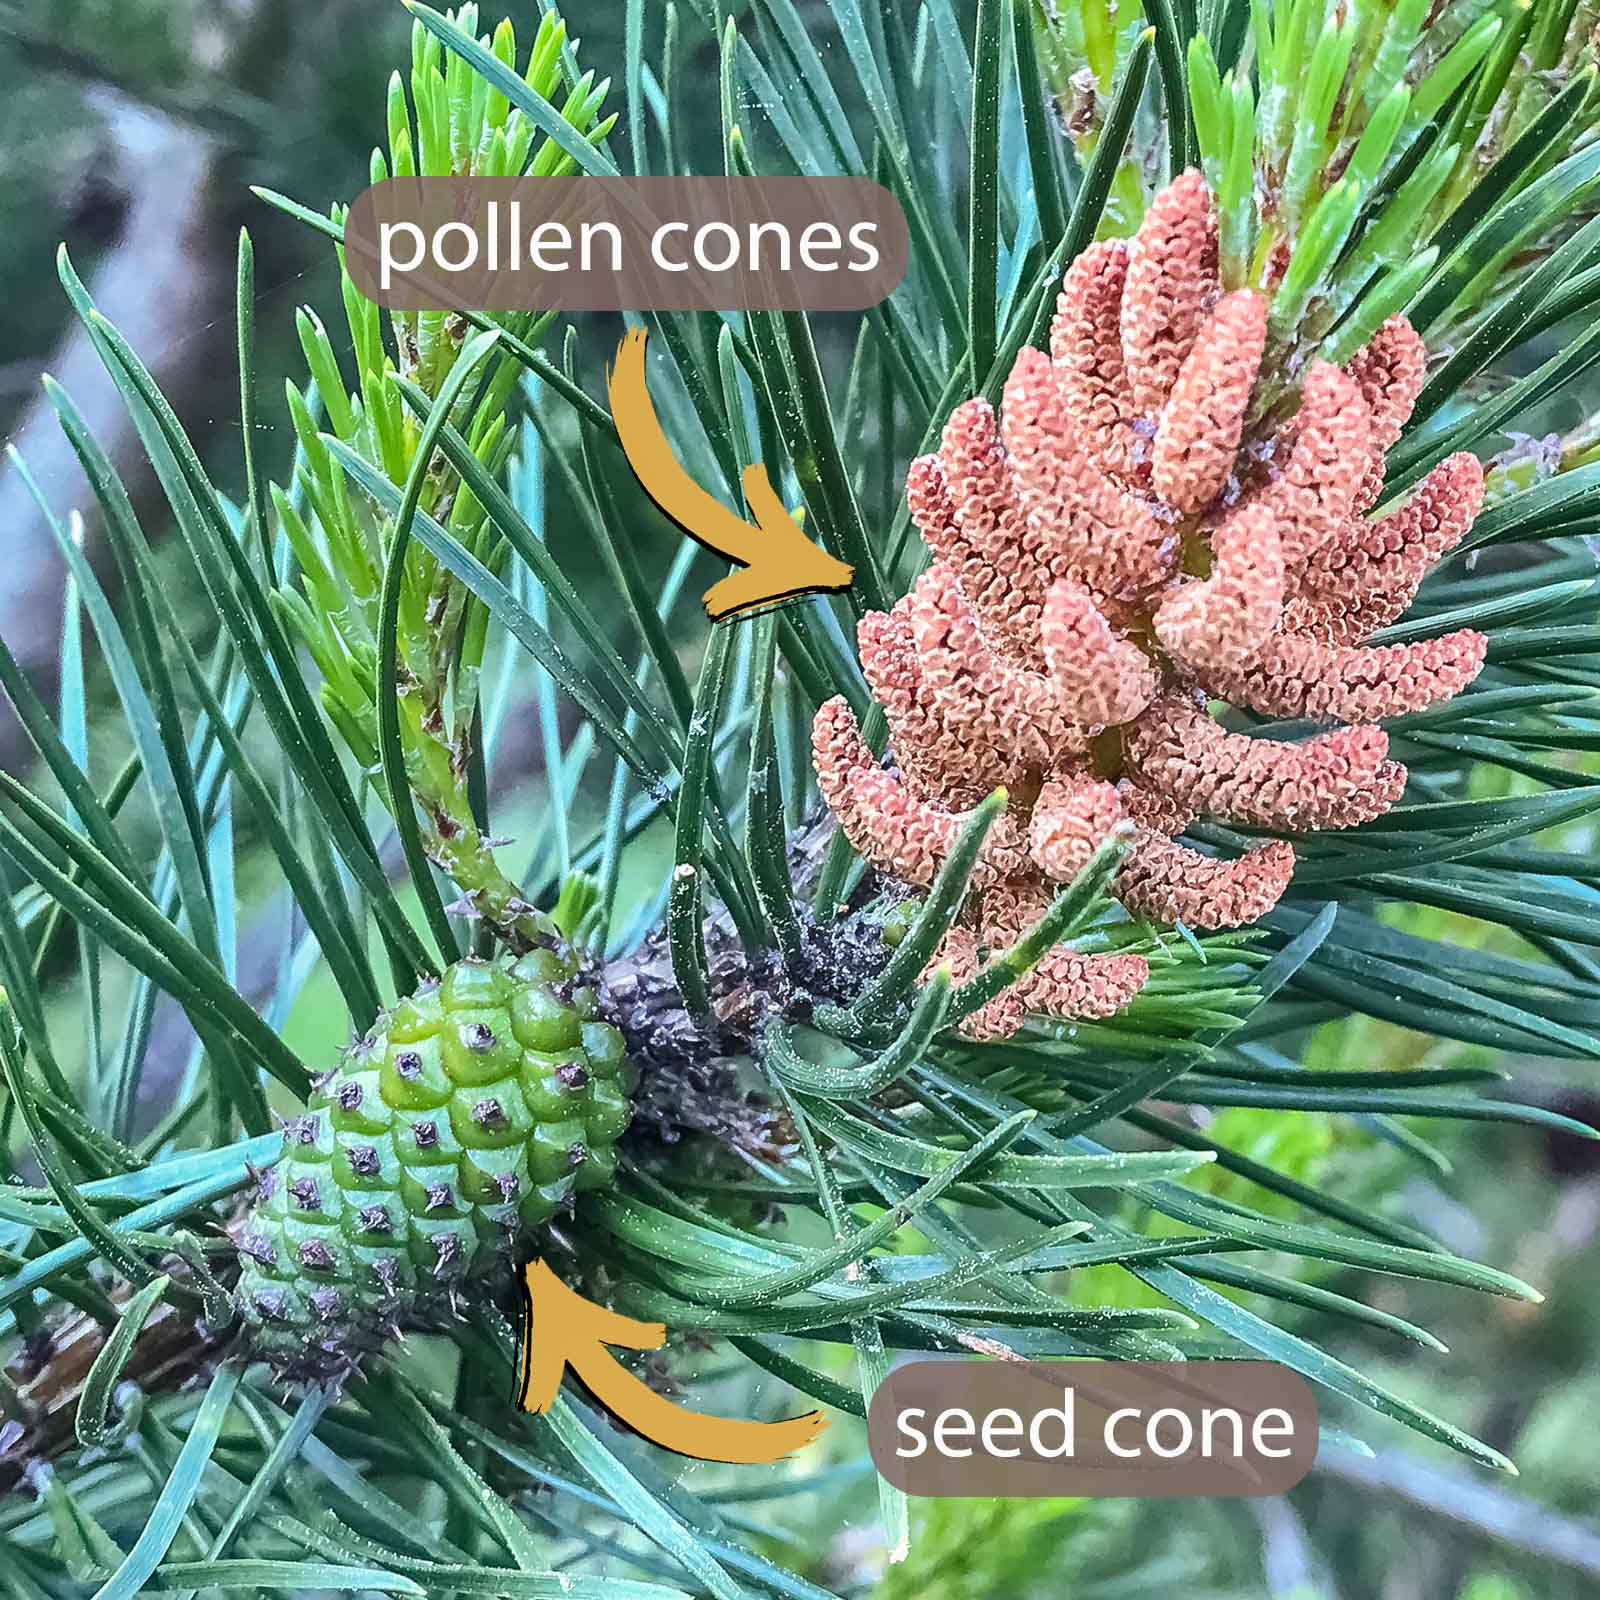 seed cone and pollen cones of shore pine